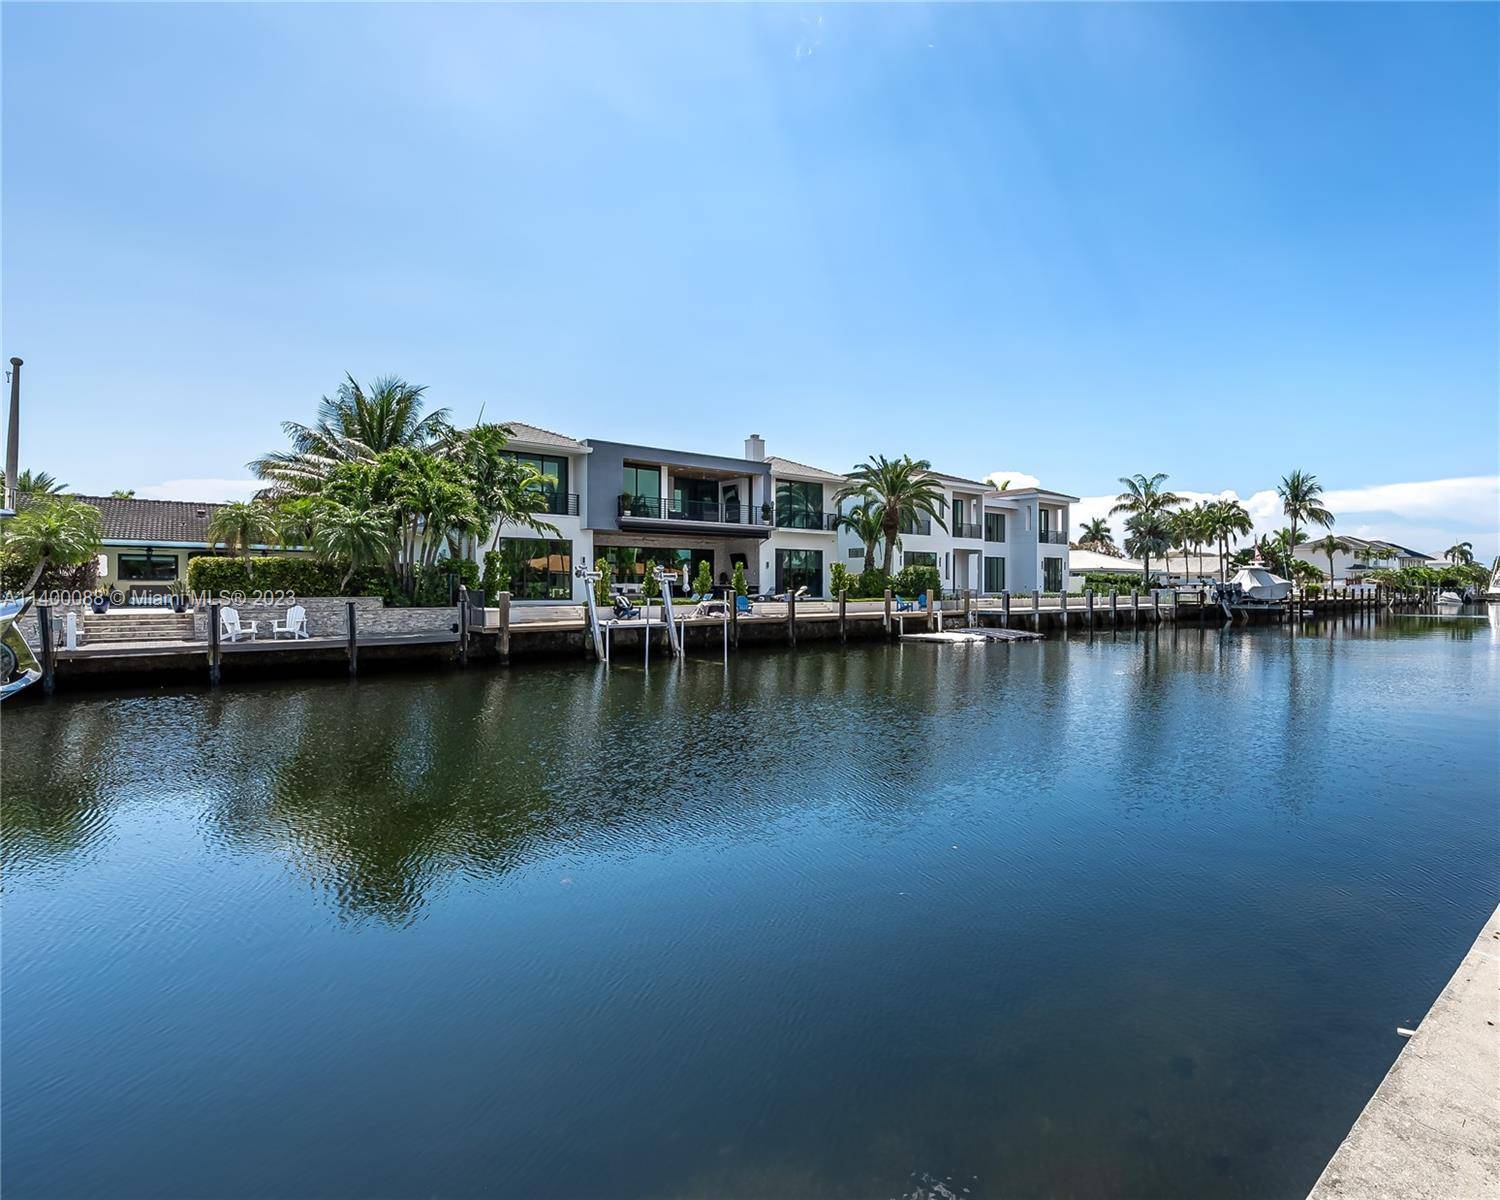 Take advantage of living in the heart of Lighthouse Point on the water in a beautifully renovated and fully furnished 4 2 home.